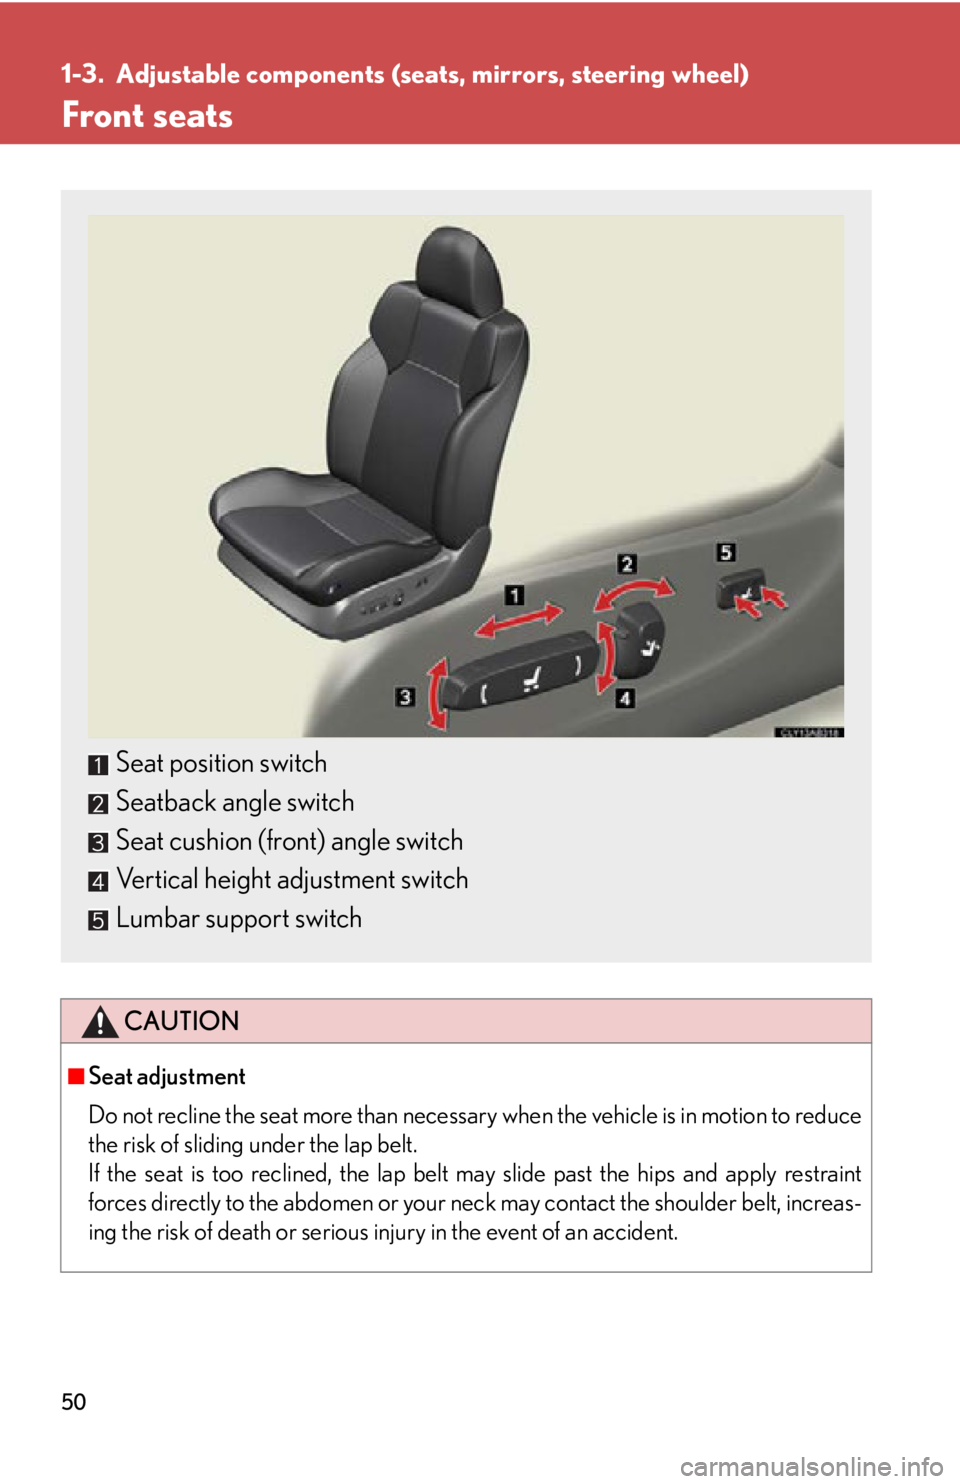 Lexus IS F 2011  Using The Bluetooth Audio System / 50
1-3. Adjustable components (seats, mirrors, steering wheel)
Front seats
CAUTION
■Seat adjustment
Do not recline the seat more than necessary when the vehicle is in motion to reduce
the risk of sl